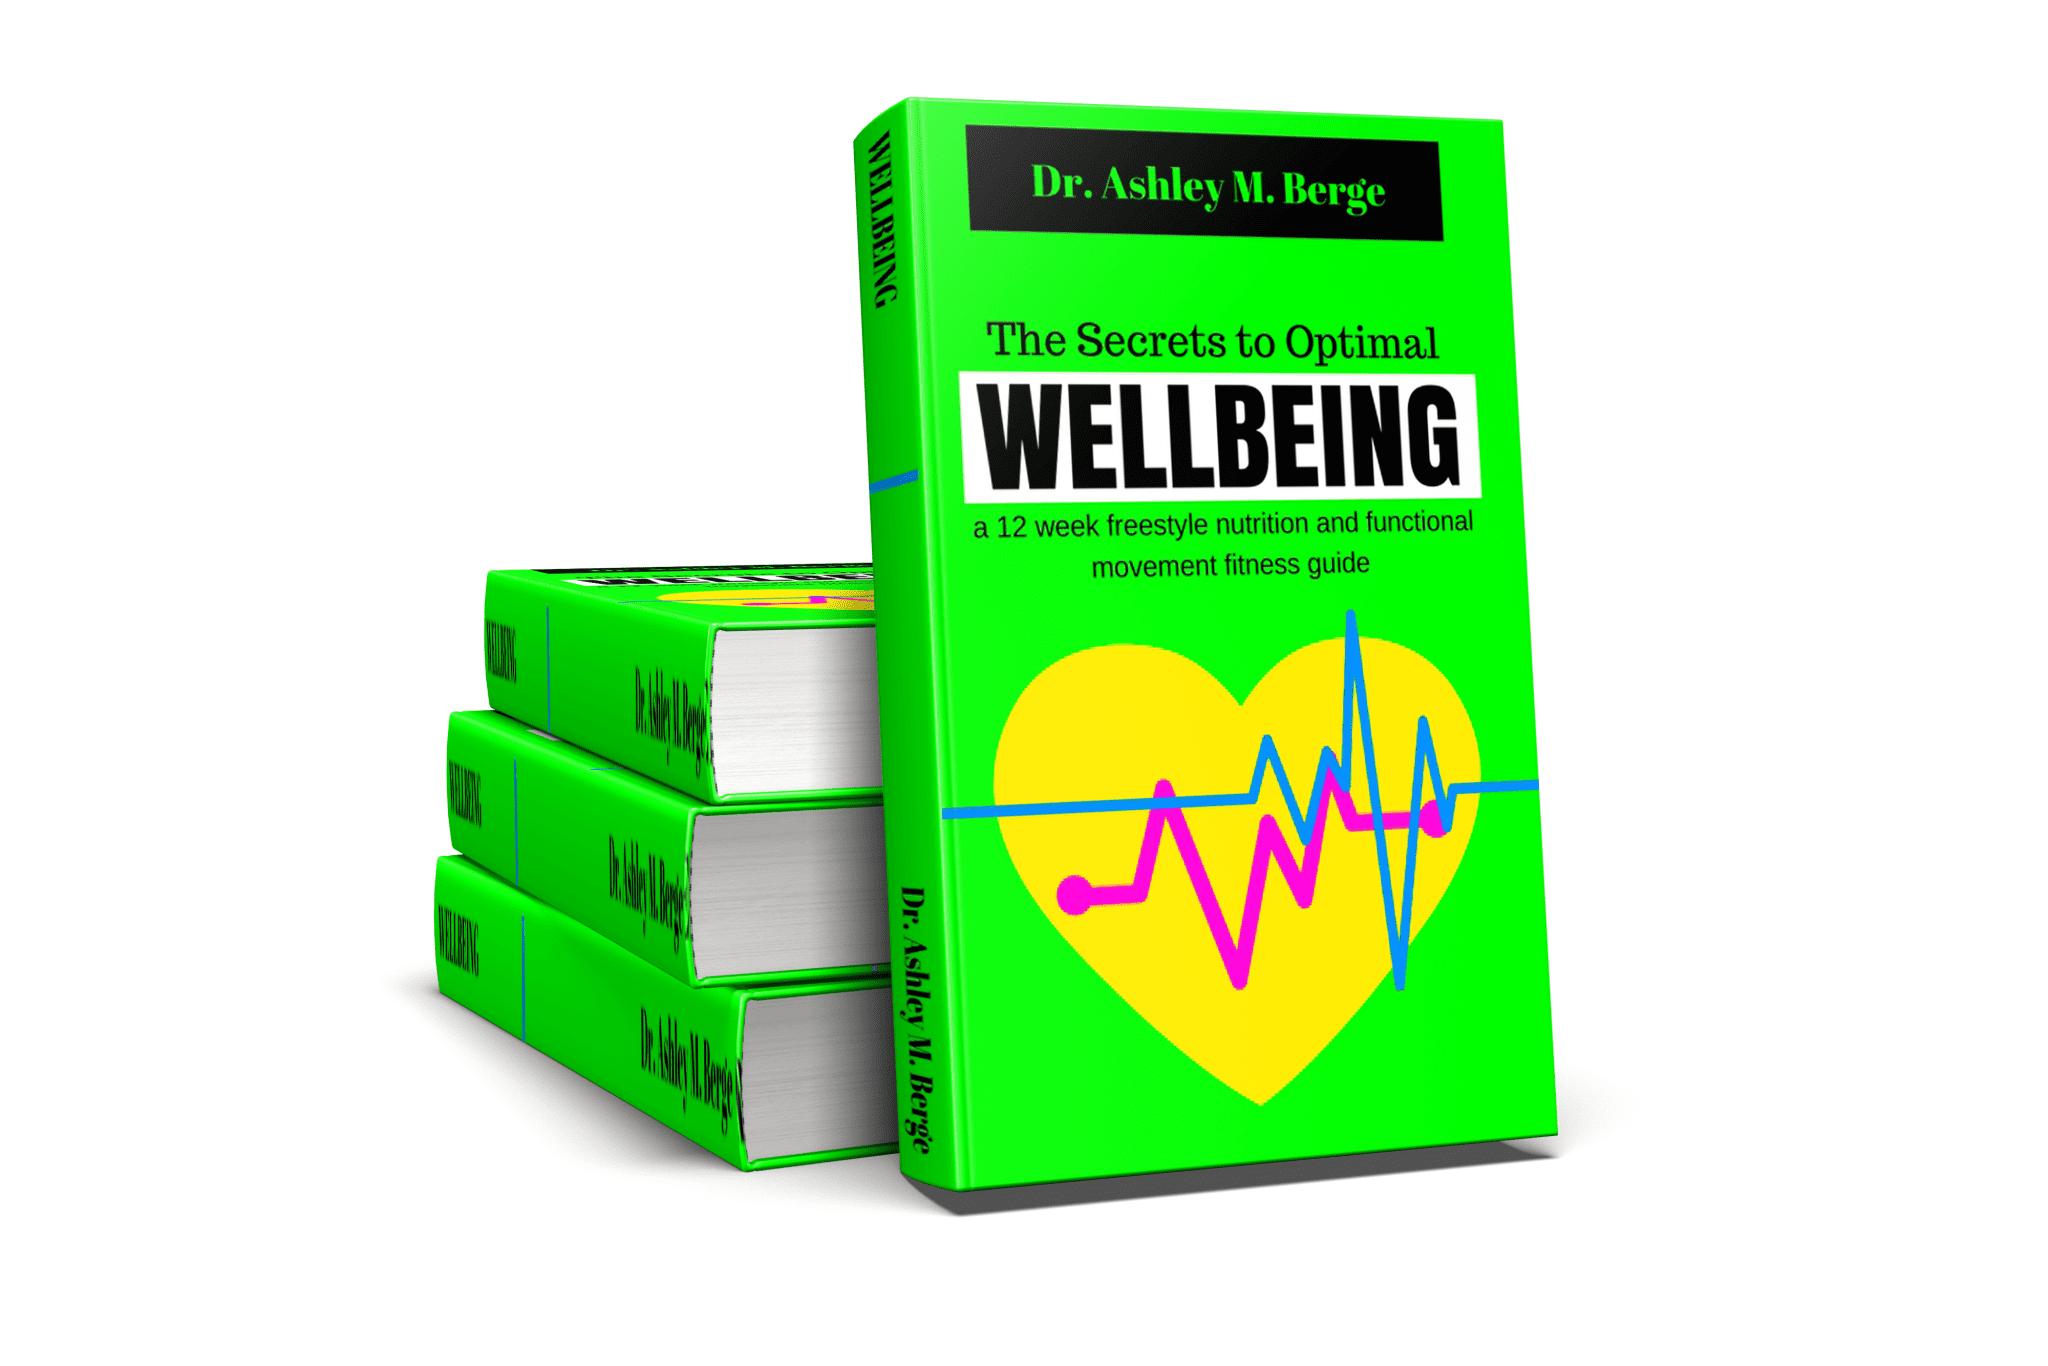 The Secrets to Optimal <a href="https://am8international.com/product/rrp-the-secrets-to-optimal-wellbeing-download-only/" data-type="product" data-id="17589" rel="nofollow">Wellbeing</a>